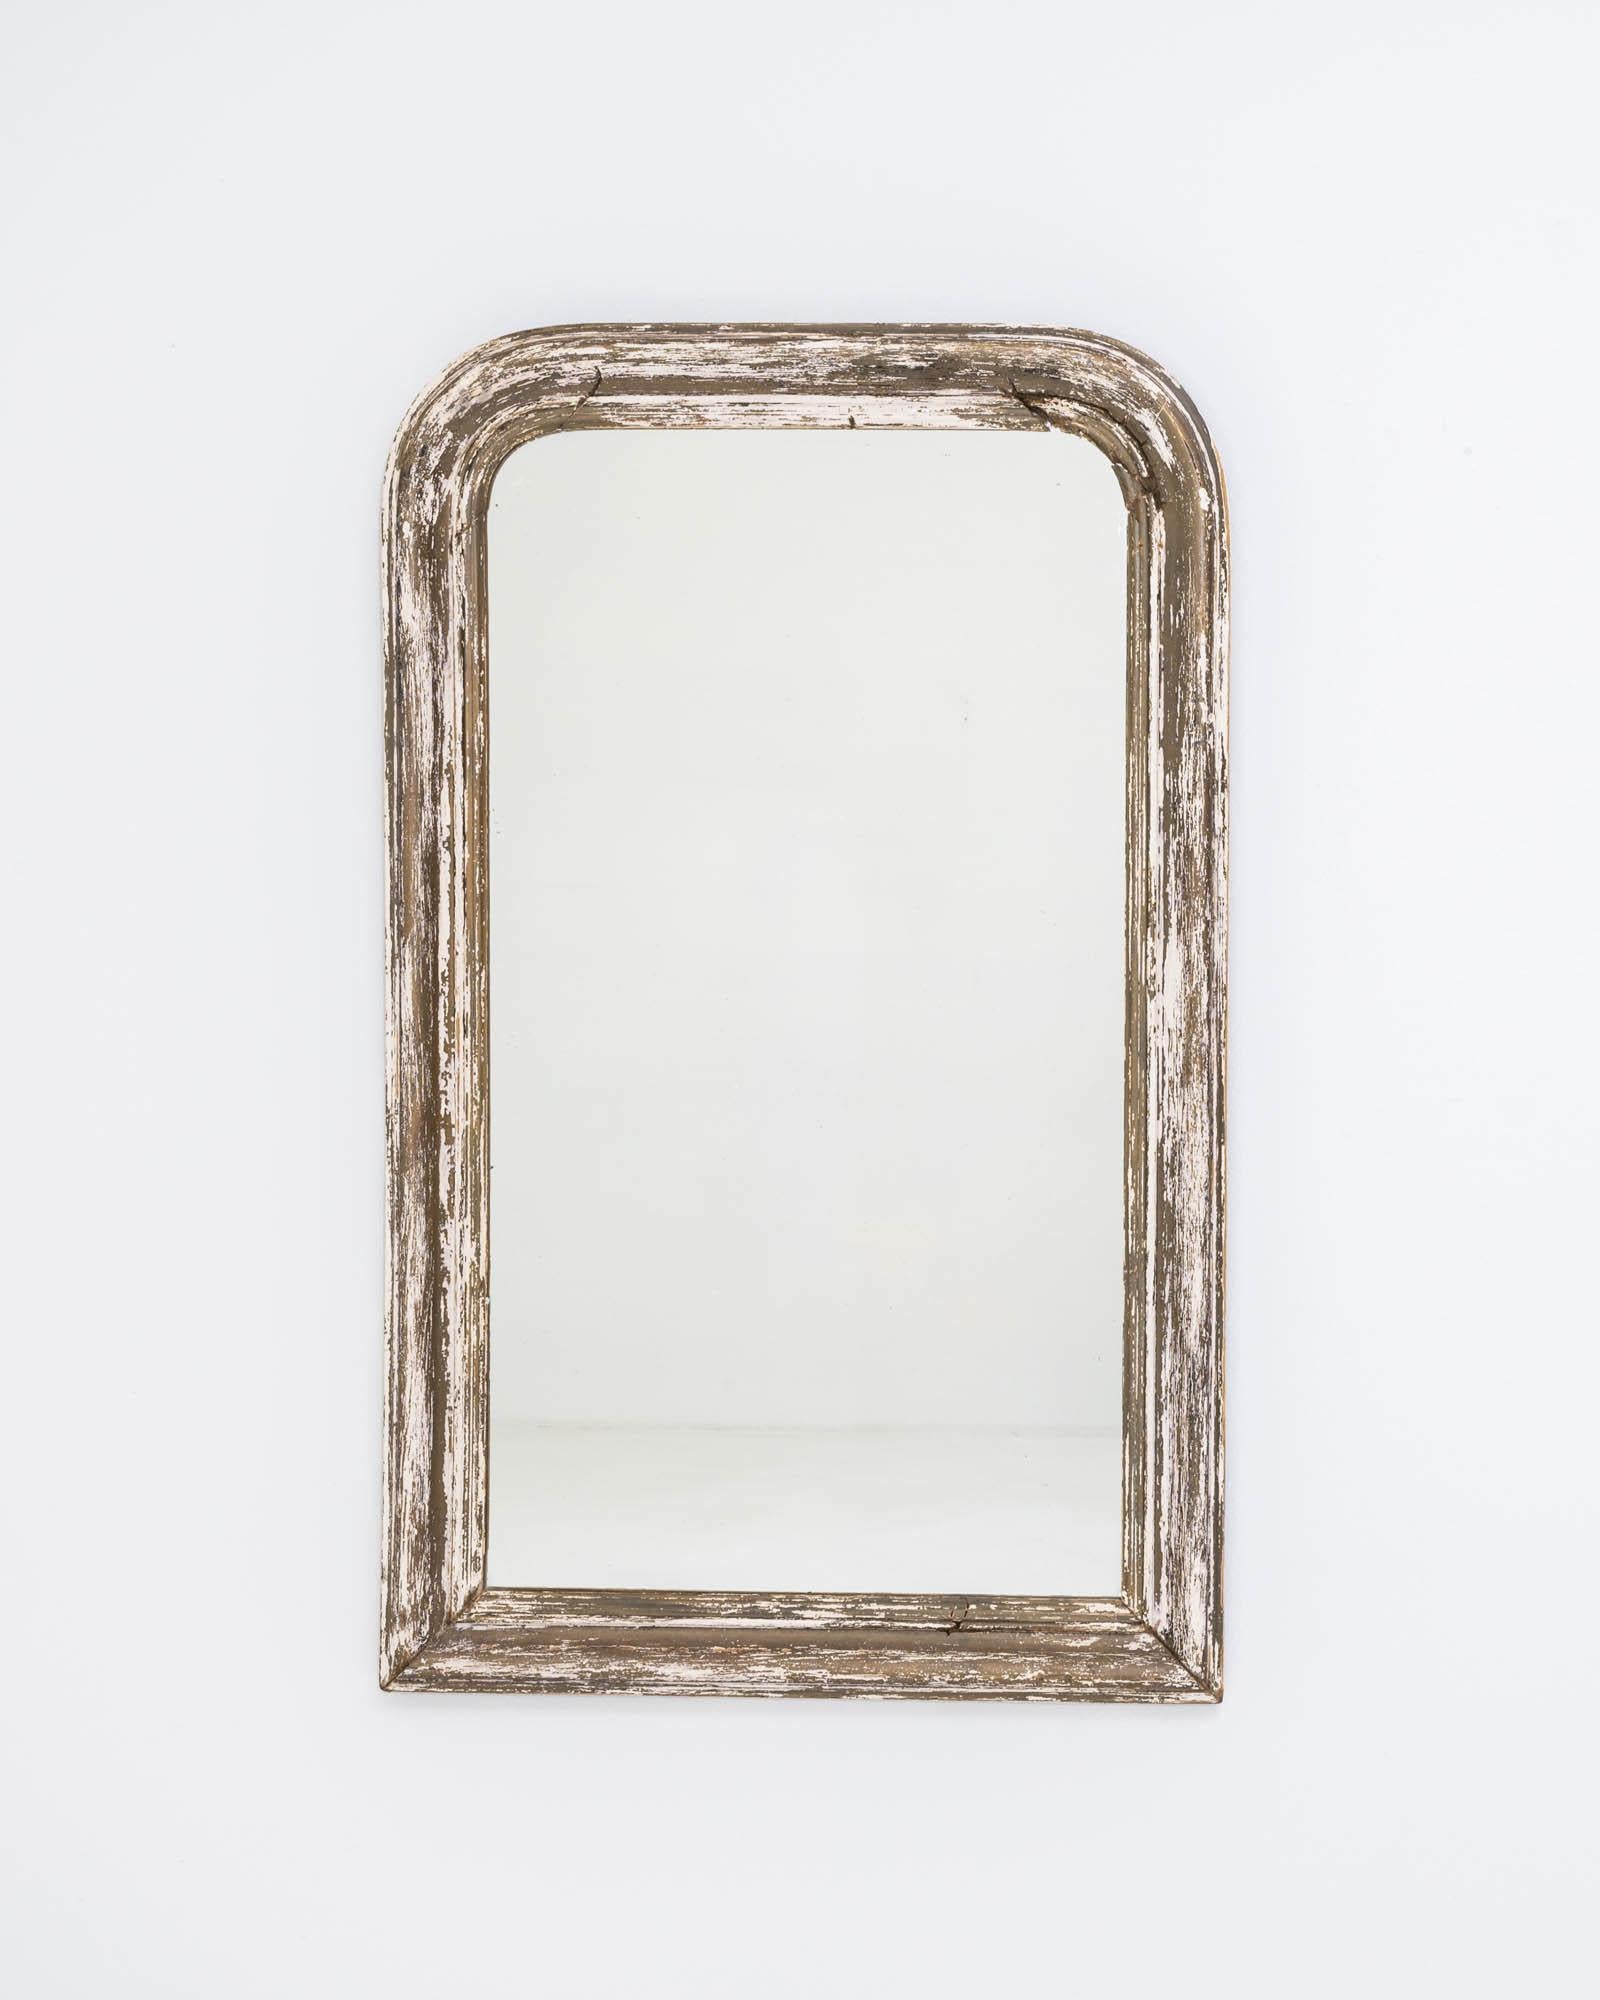 A wooden mirror created in 19th century France. Simple and unassuming, this charming mirror possesses a friendly and rustic demeanor. Through the many years, the off-white paint that coats the frame has slowly ebbed away, creating a fascinating